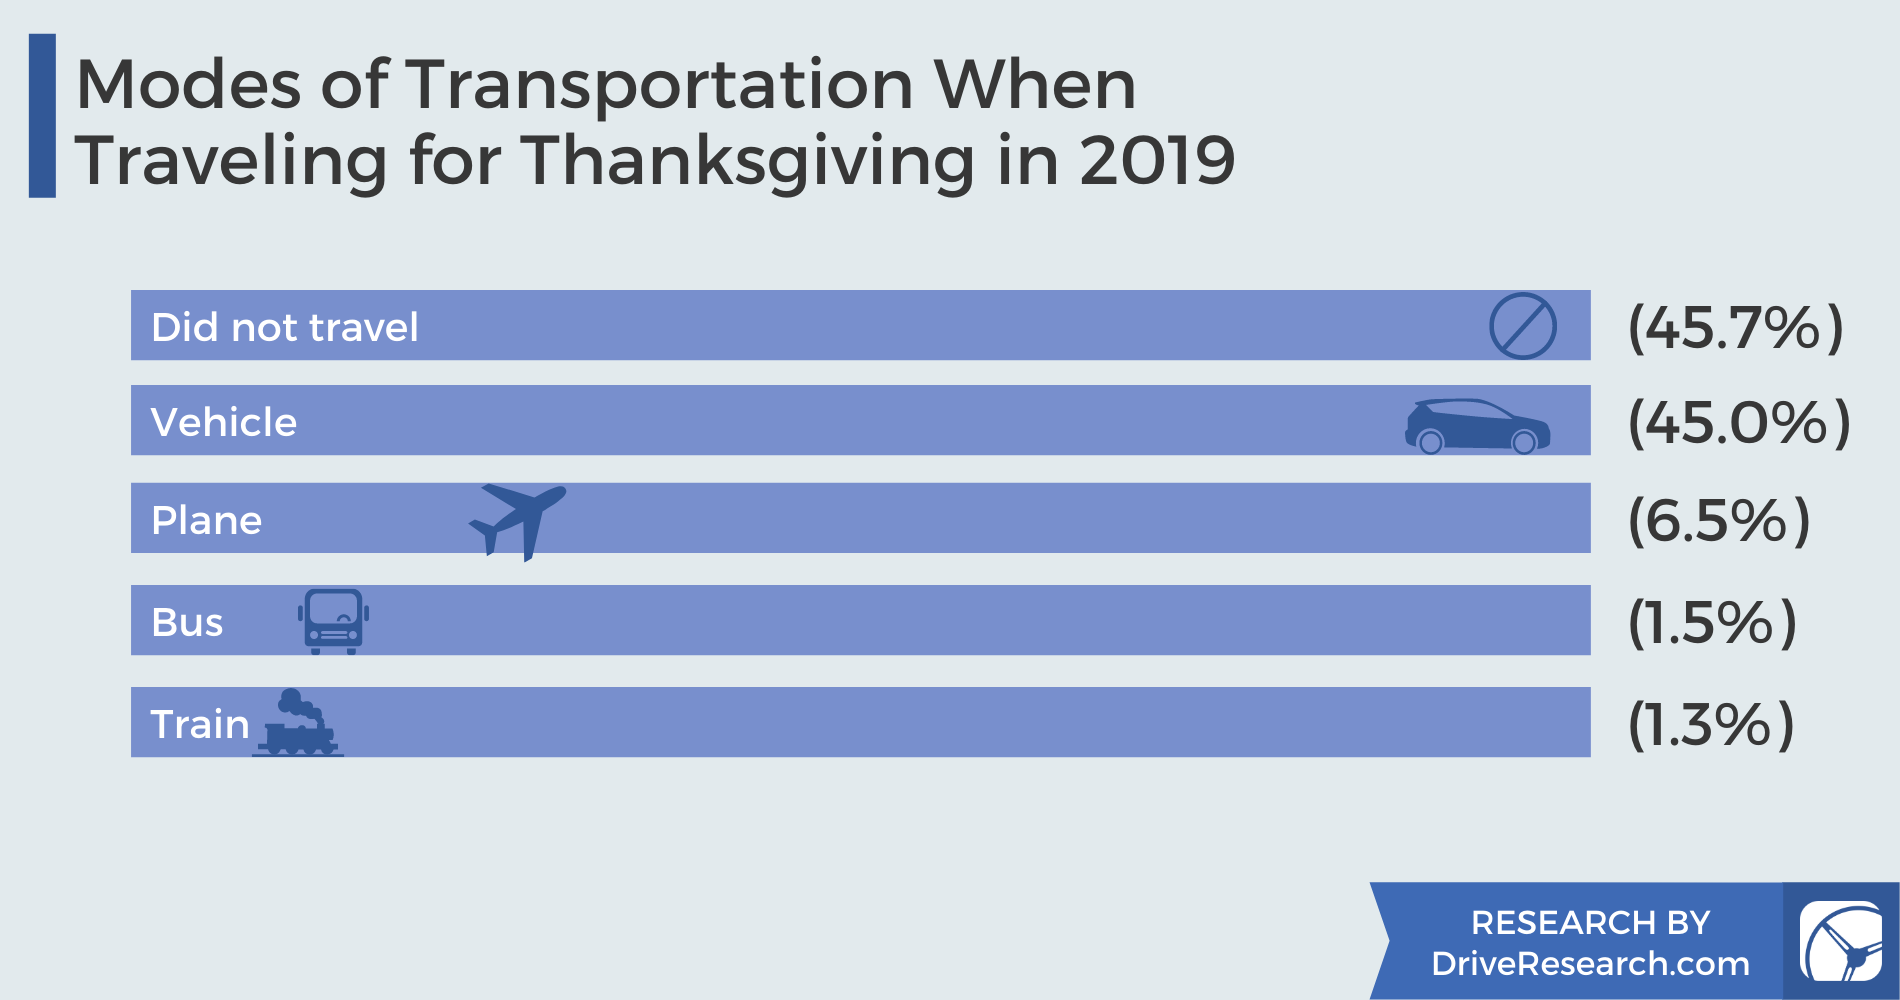 Modes of transportation when traveling for thanksgiving in 2019